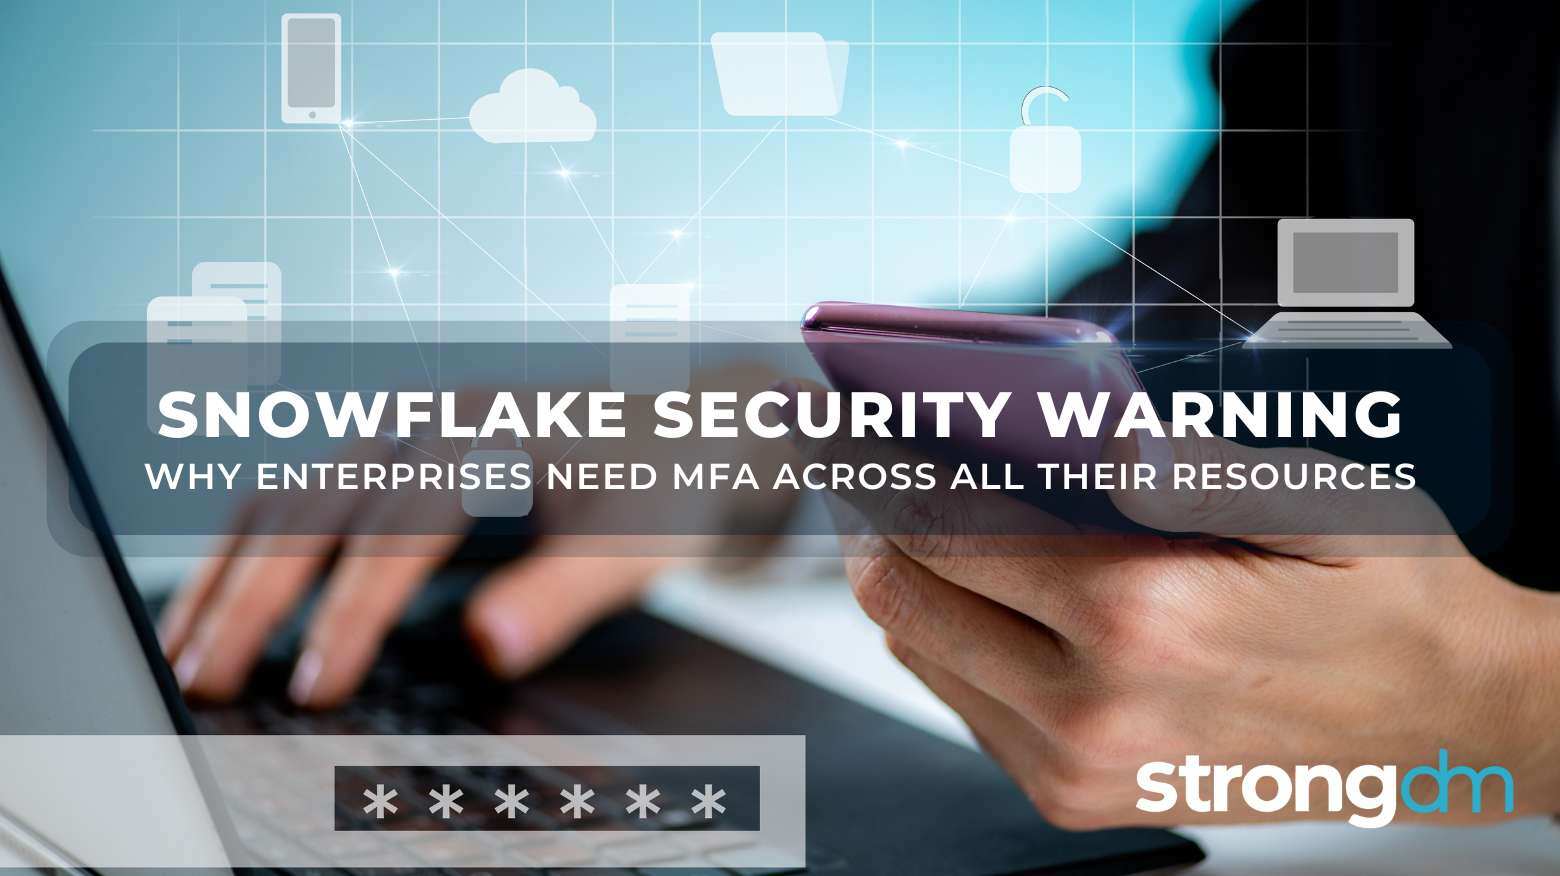 Snowflake's Security Warning Is Why Enterprises Need MFA Across All Their Resources